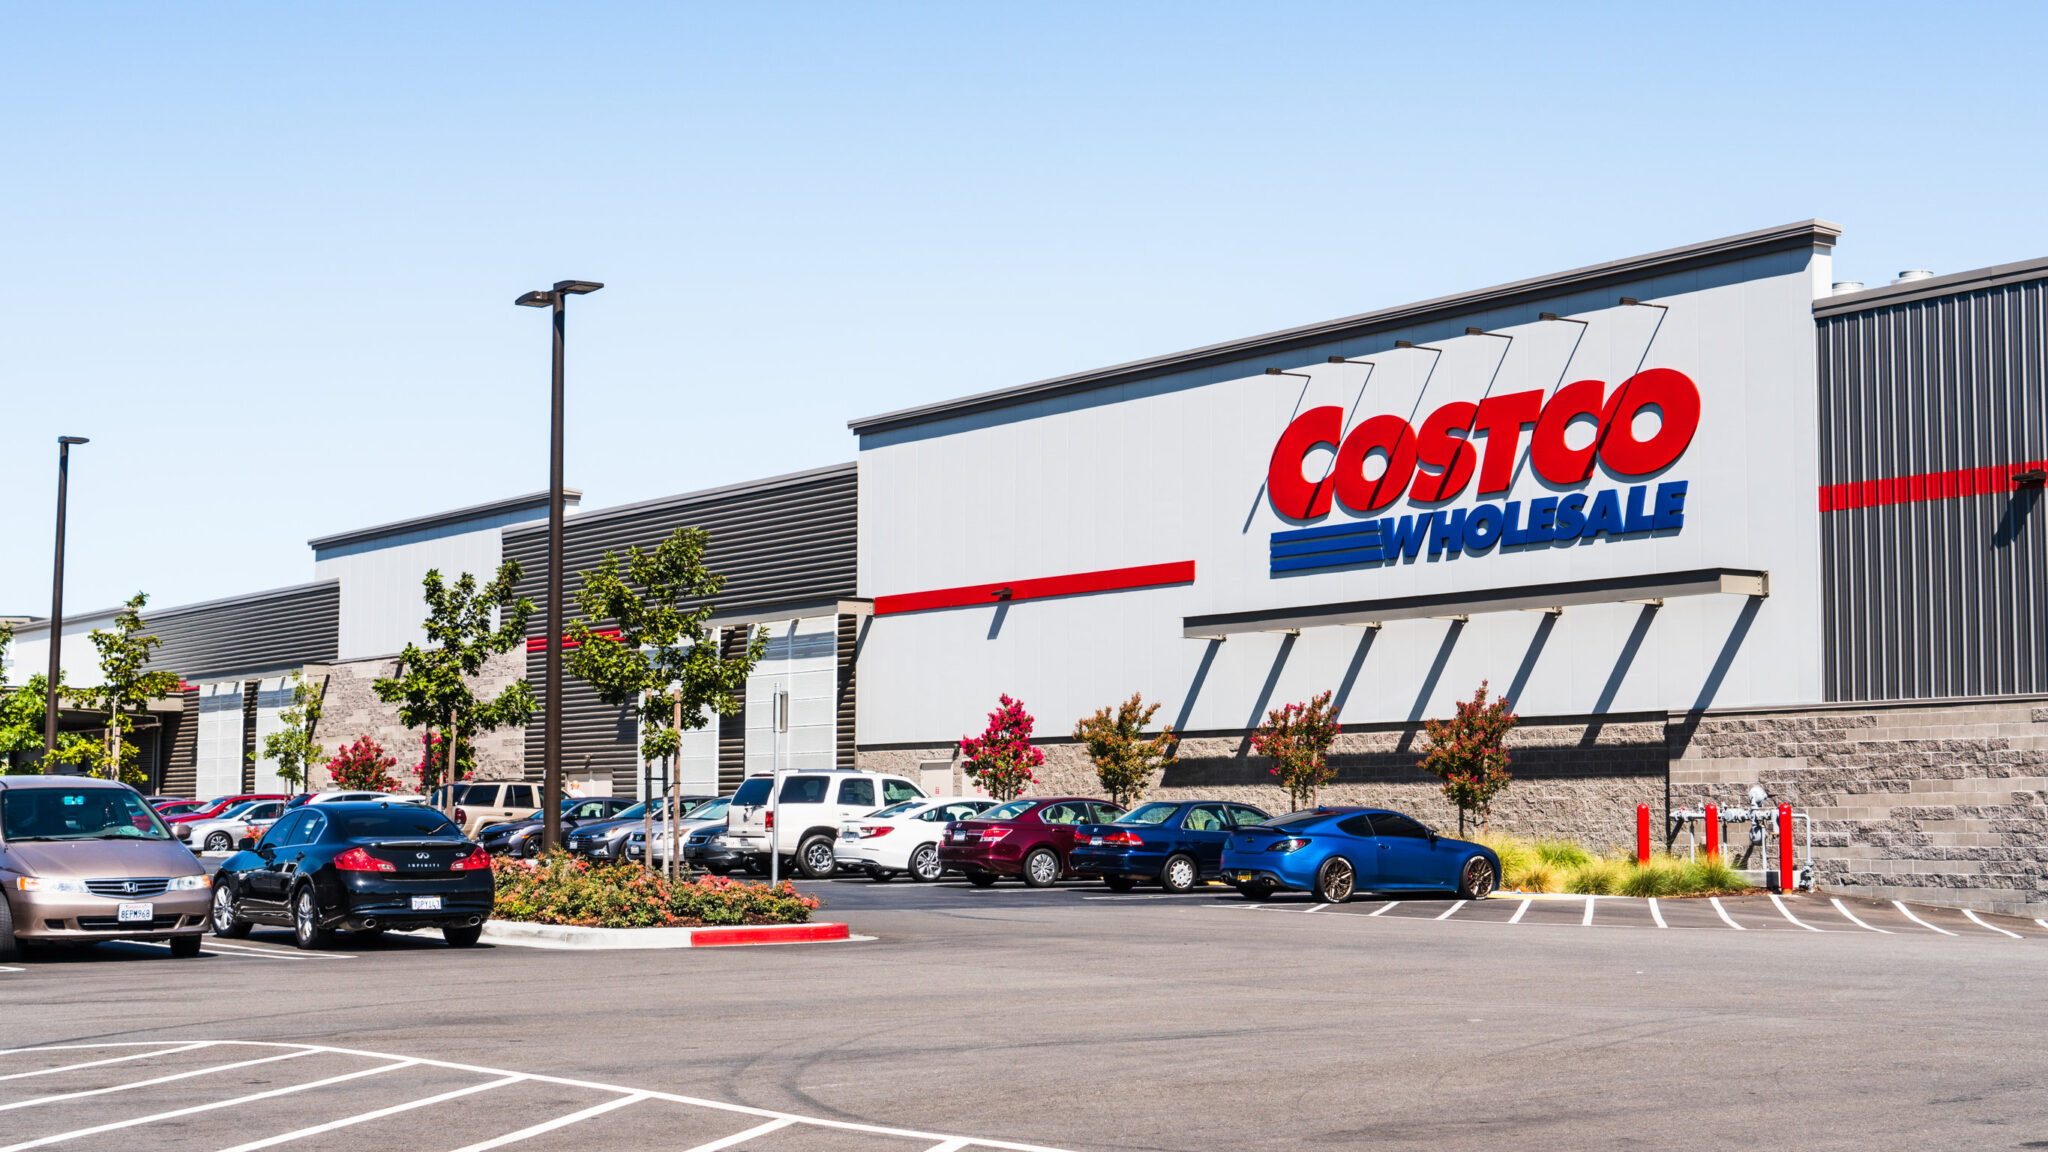 Here Are The Costco Father's Day Deals